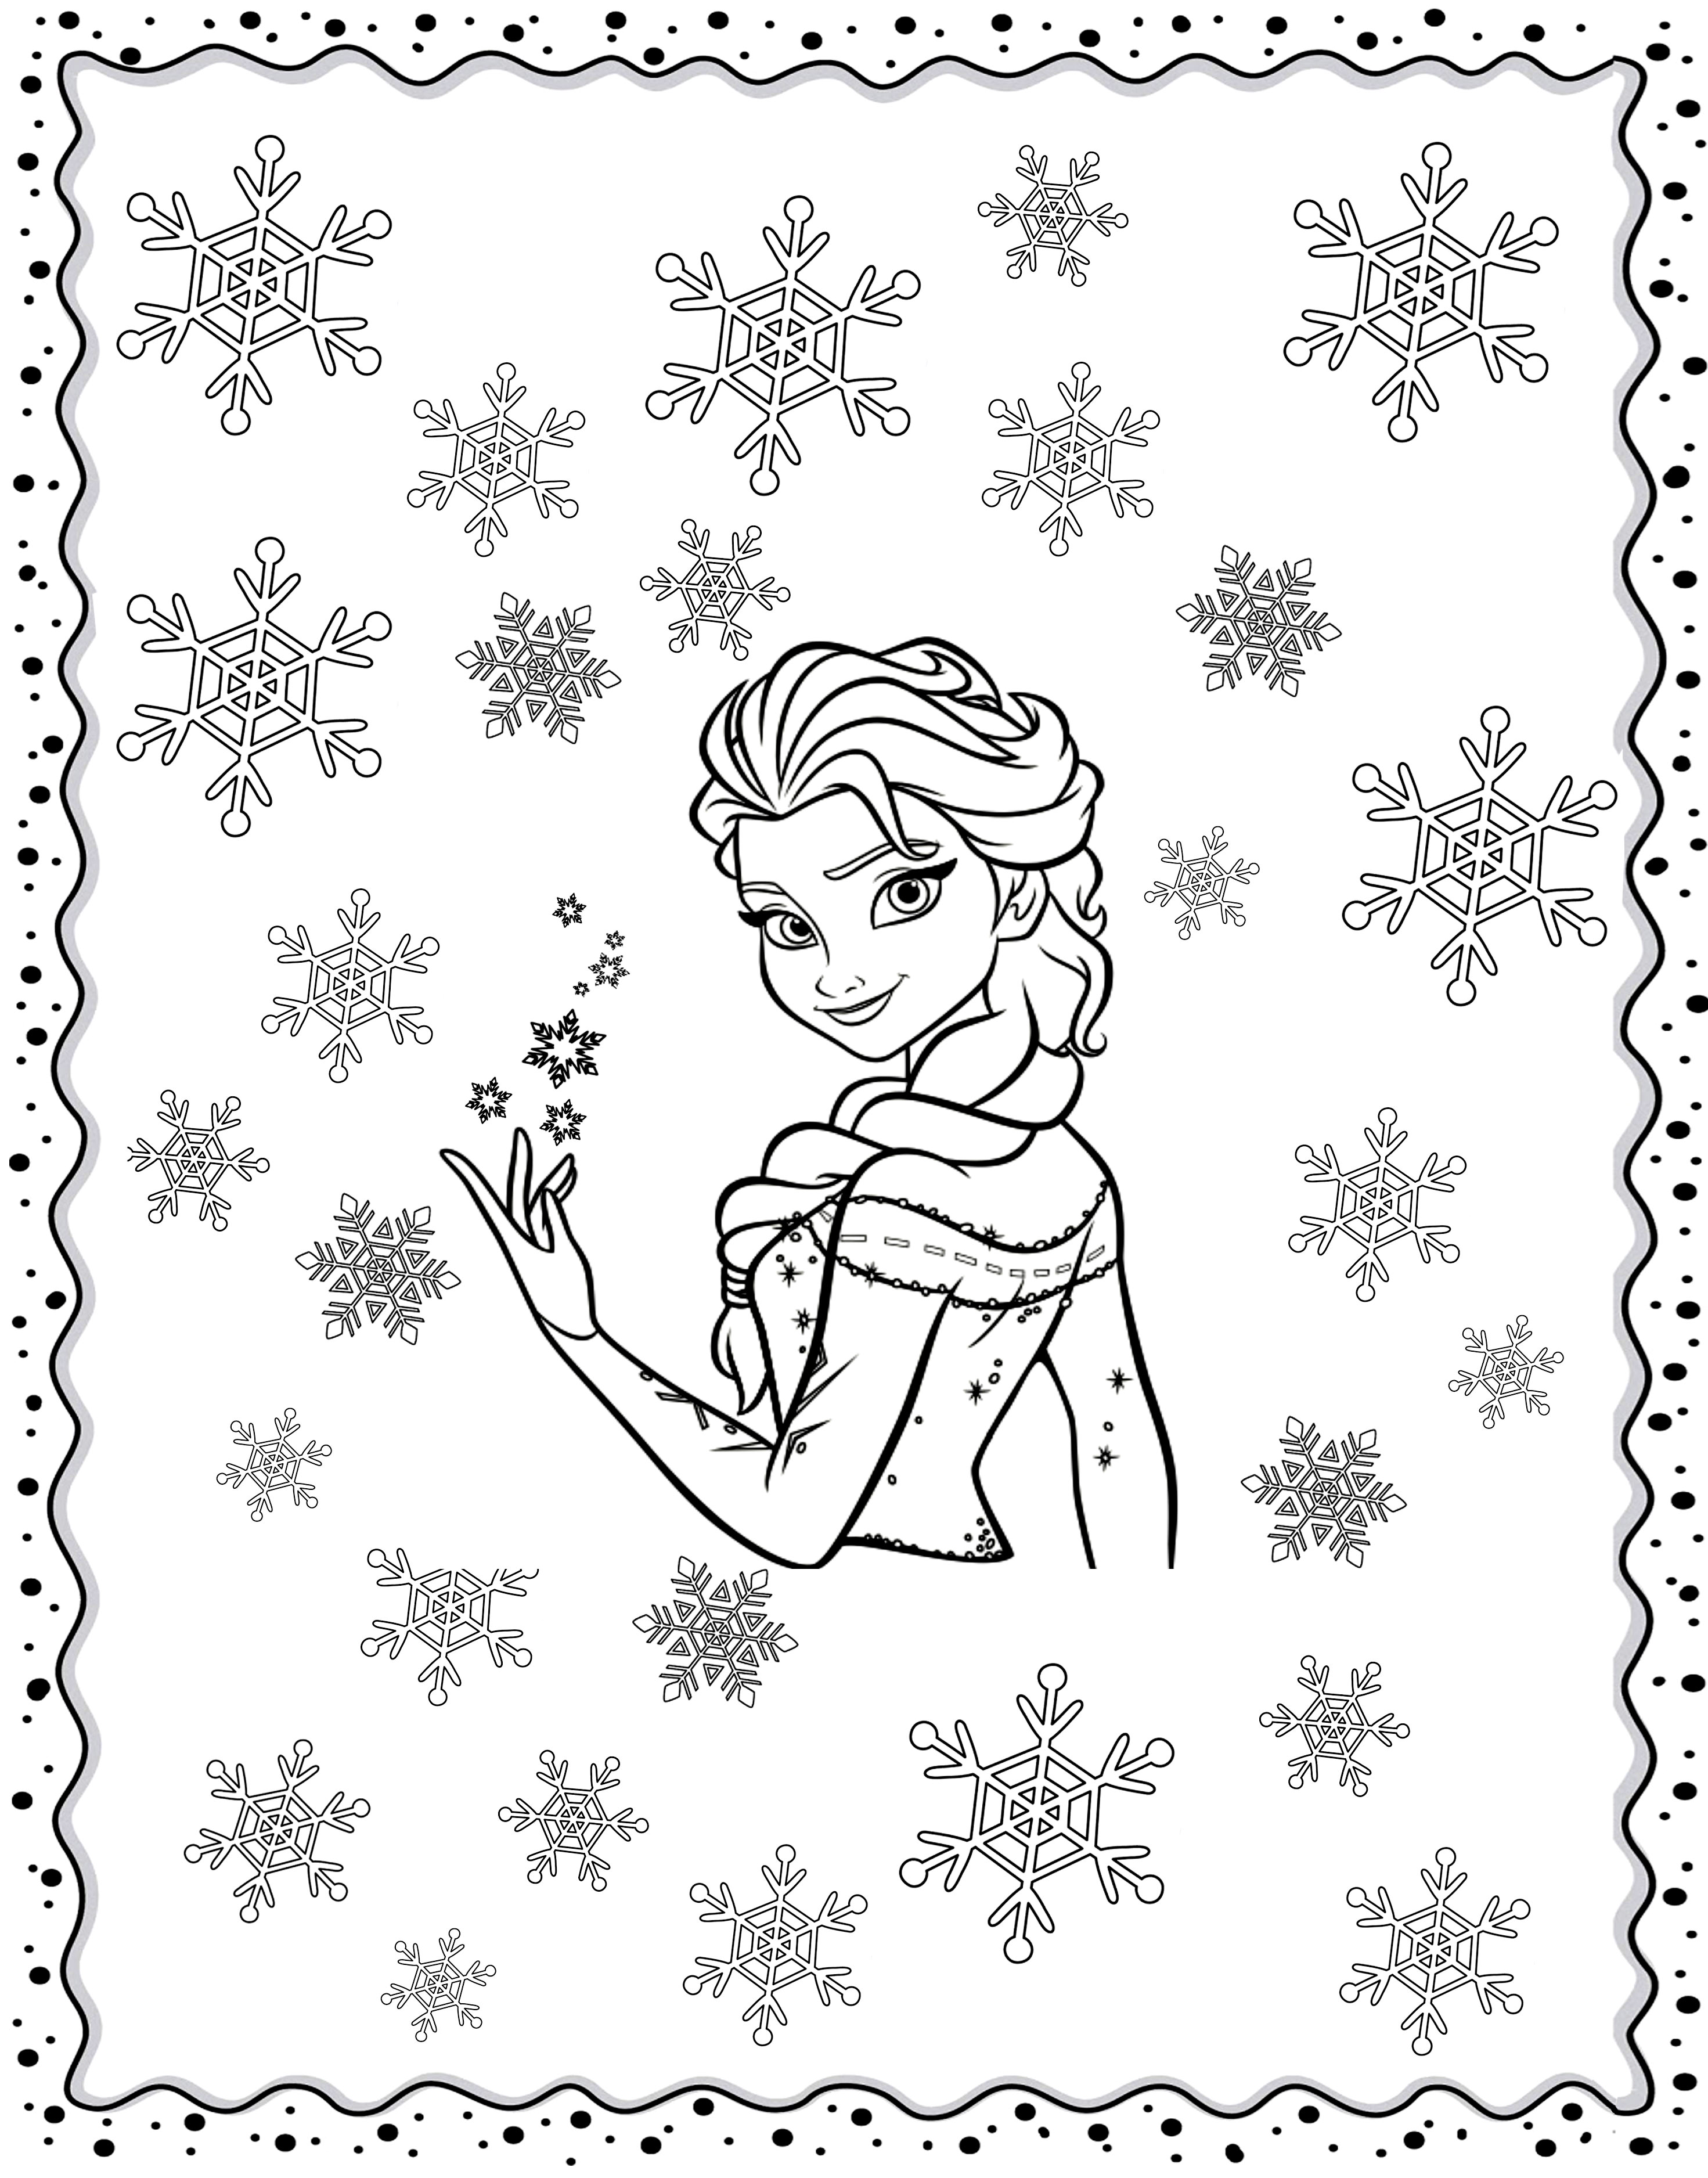 Original coloring inspired by Frozen, with Elsa in middle of winter flakes